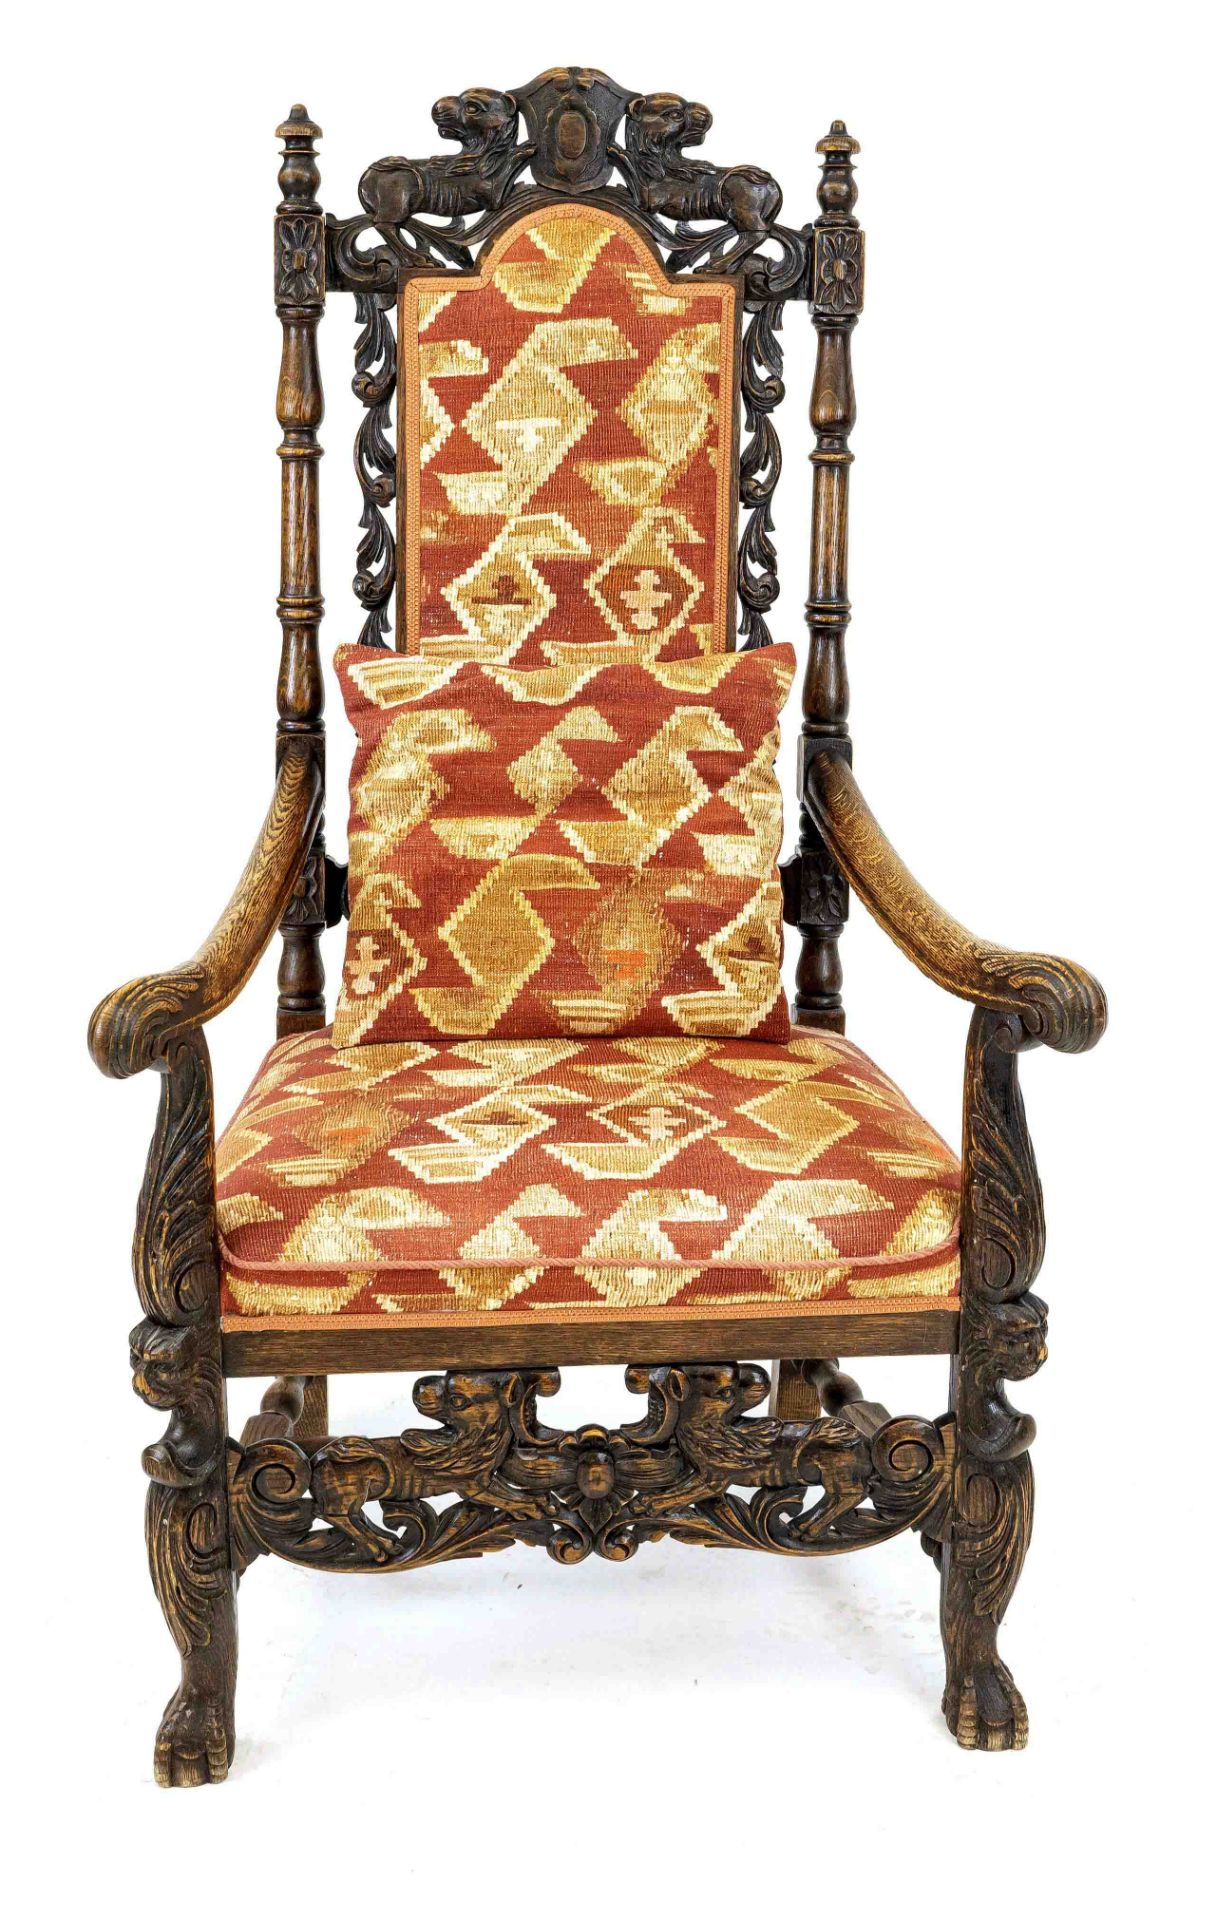 Armchair from around 1880, oak, carving typical of the period, 125 x 70 x 60 cm - Image 2 of 2